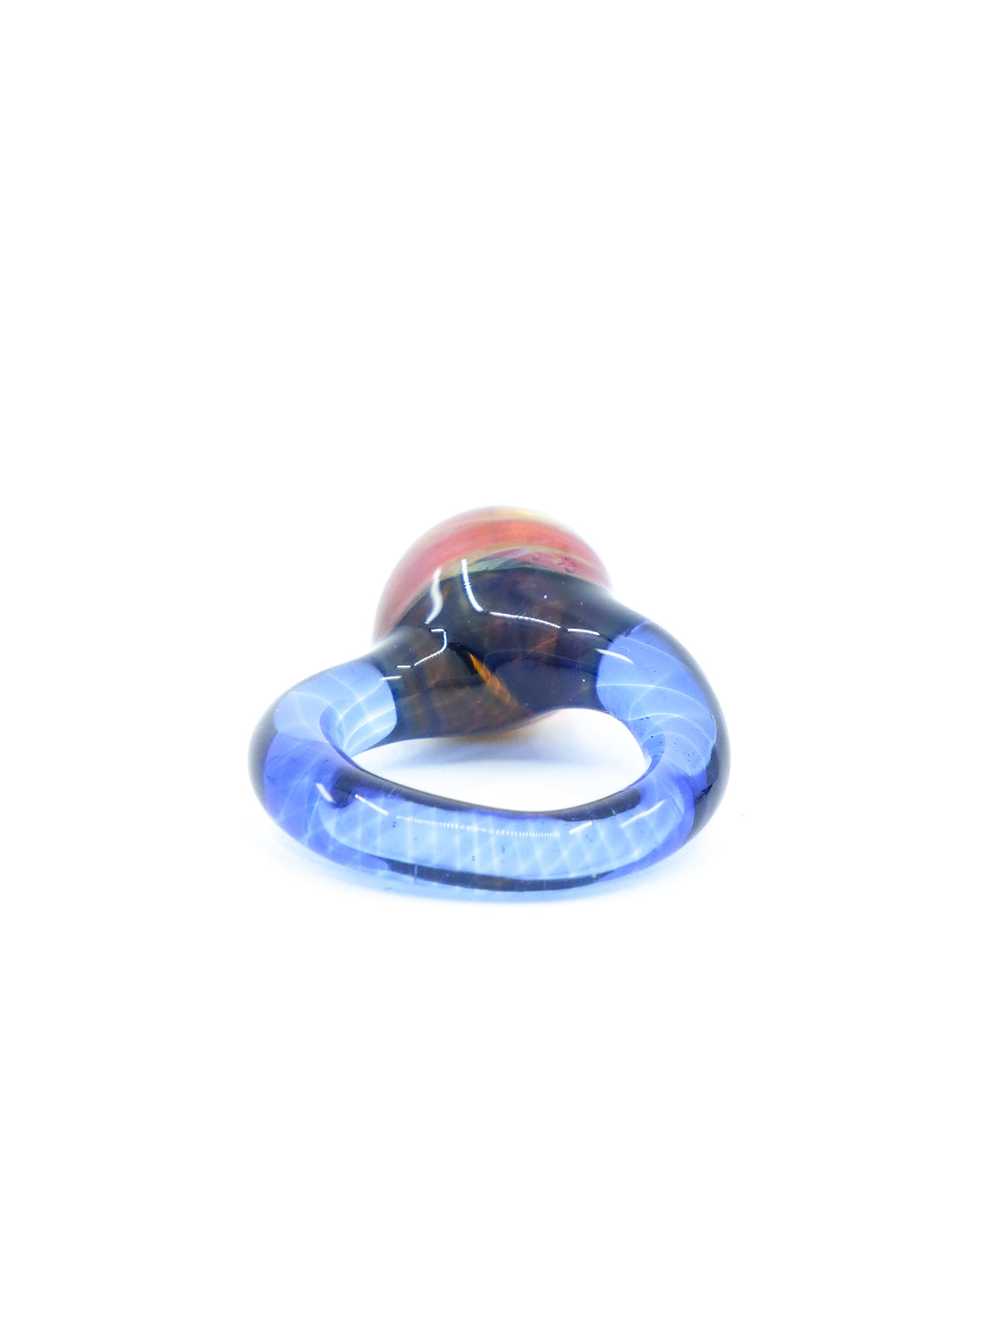 Blue Glass Dome Ring - image 3